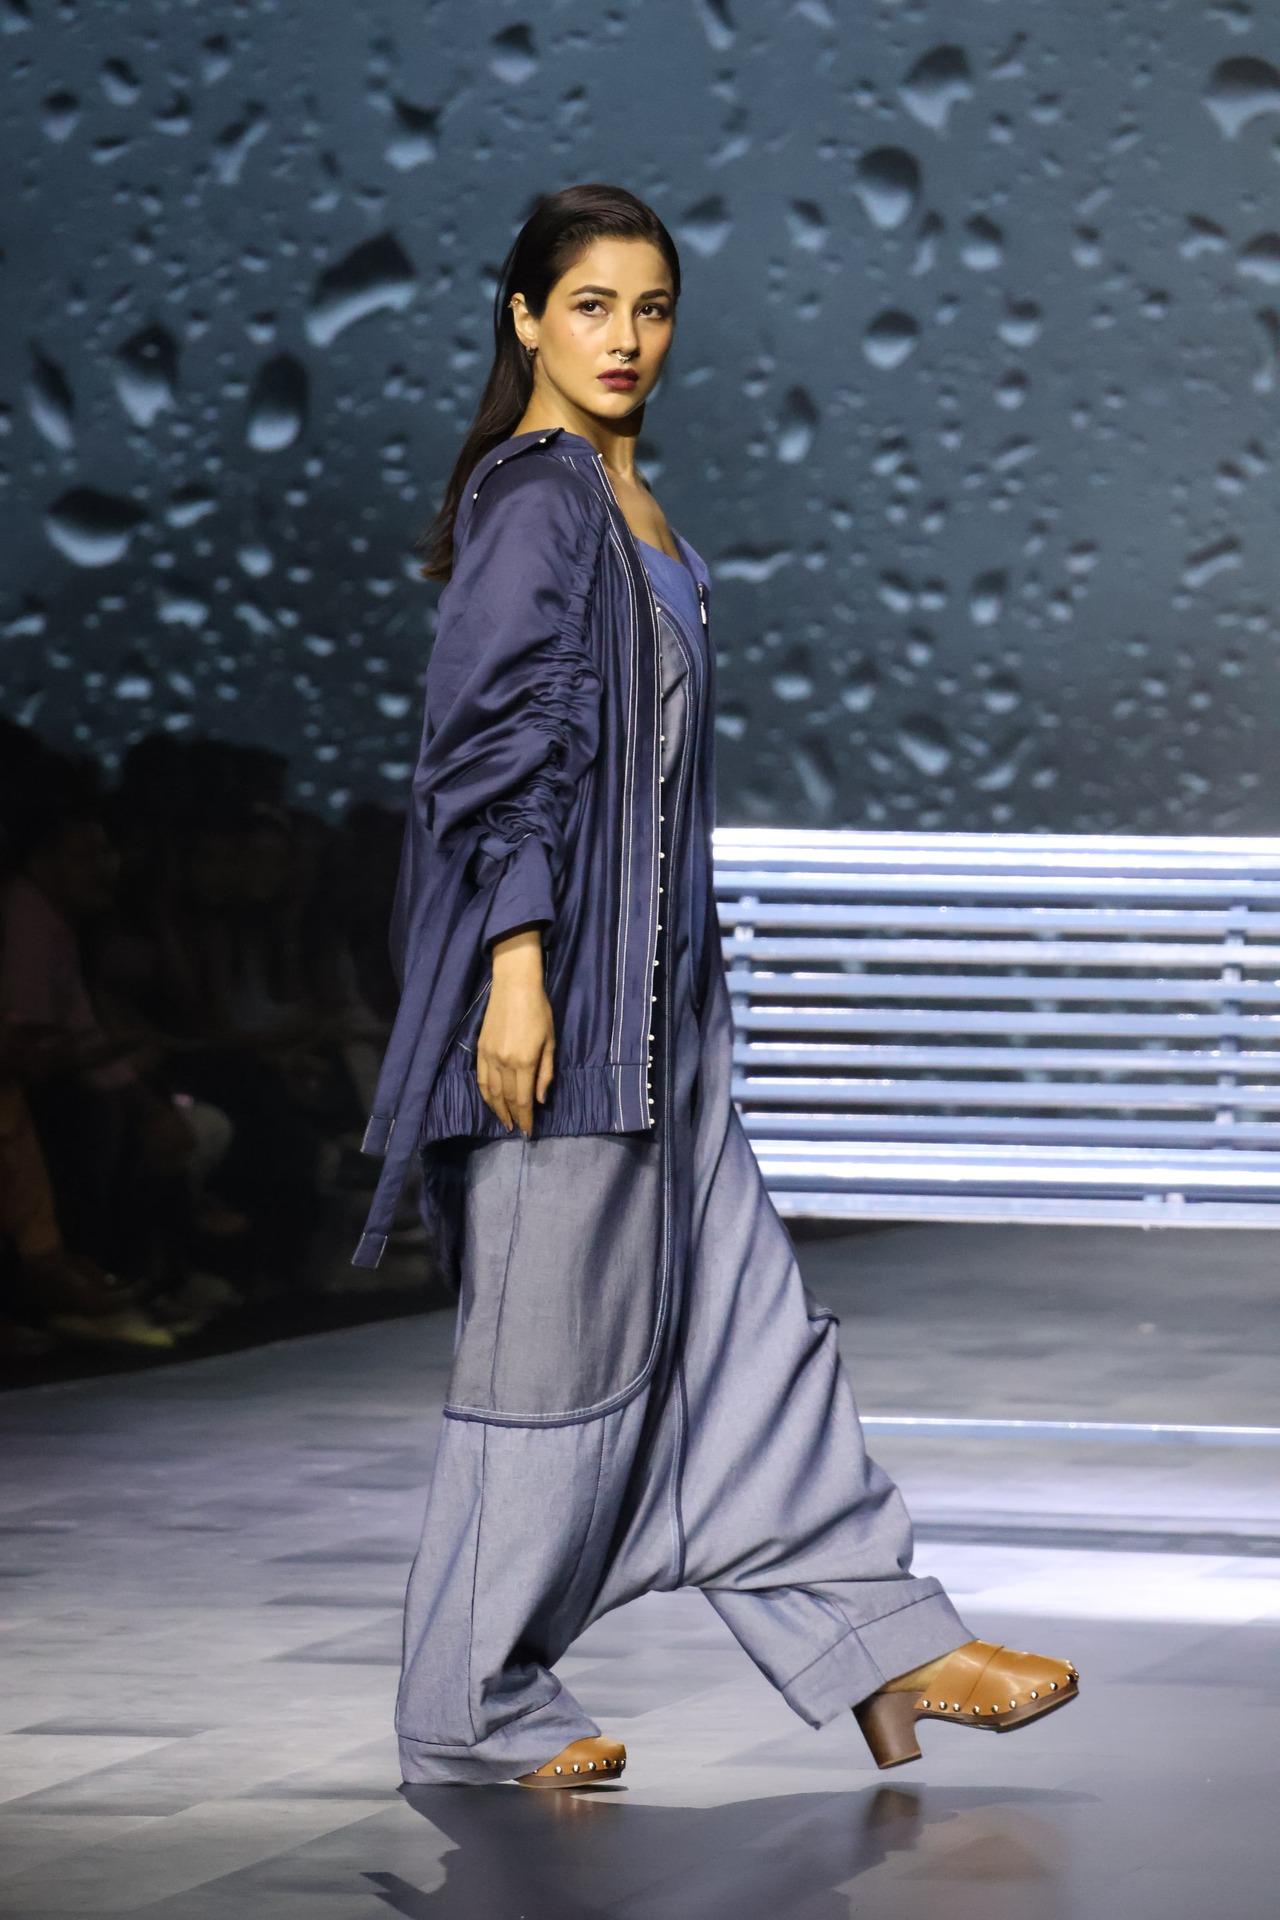 Shehnaaz was seen splashing on the runway in a baggy jumpsuit with strap sleeves and a jacket layered to add that oomph element